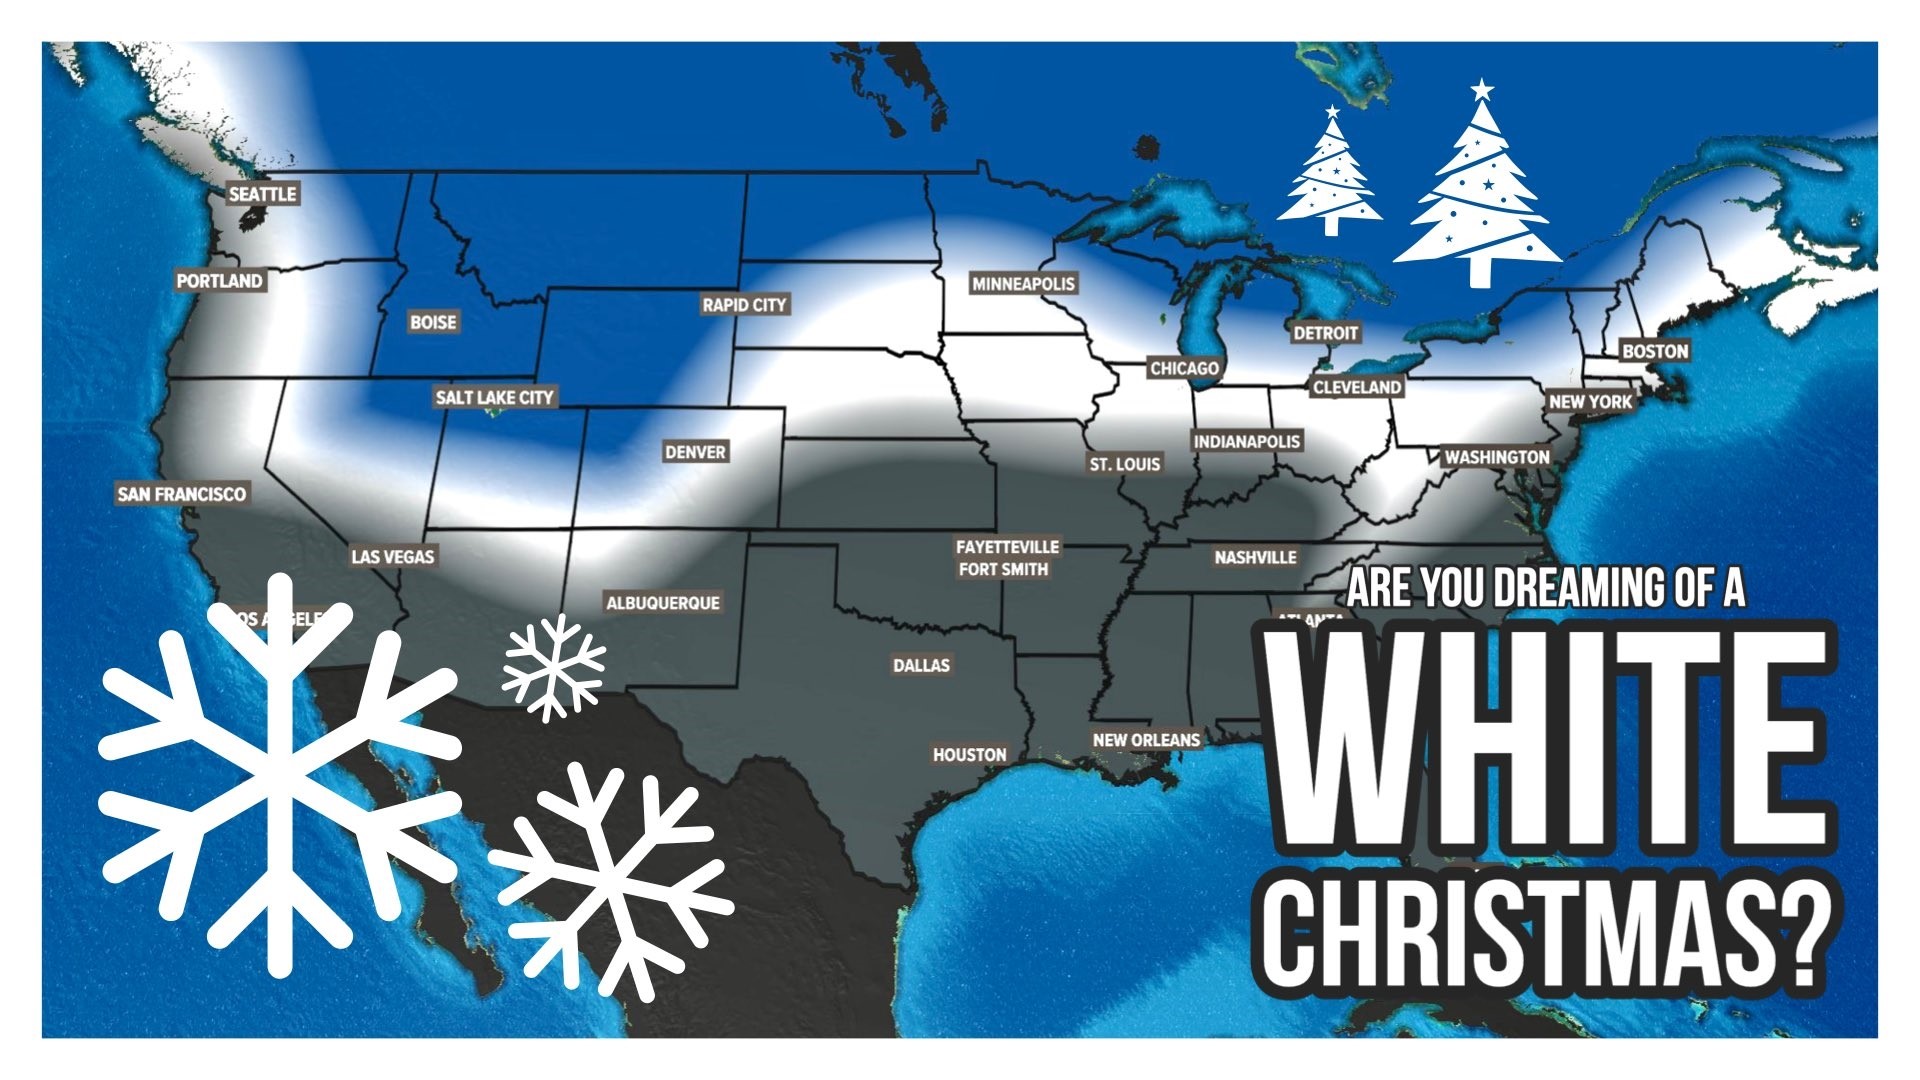 Are you dreaming of a white Christmas? Here are the chances for that dream becoming a reality.